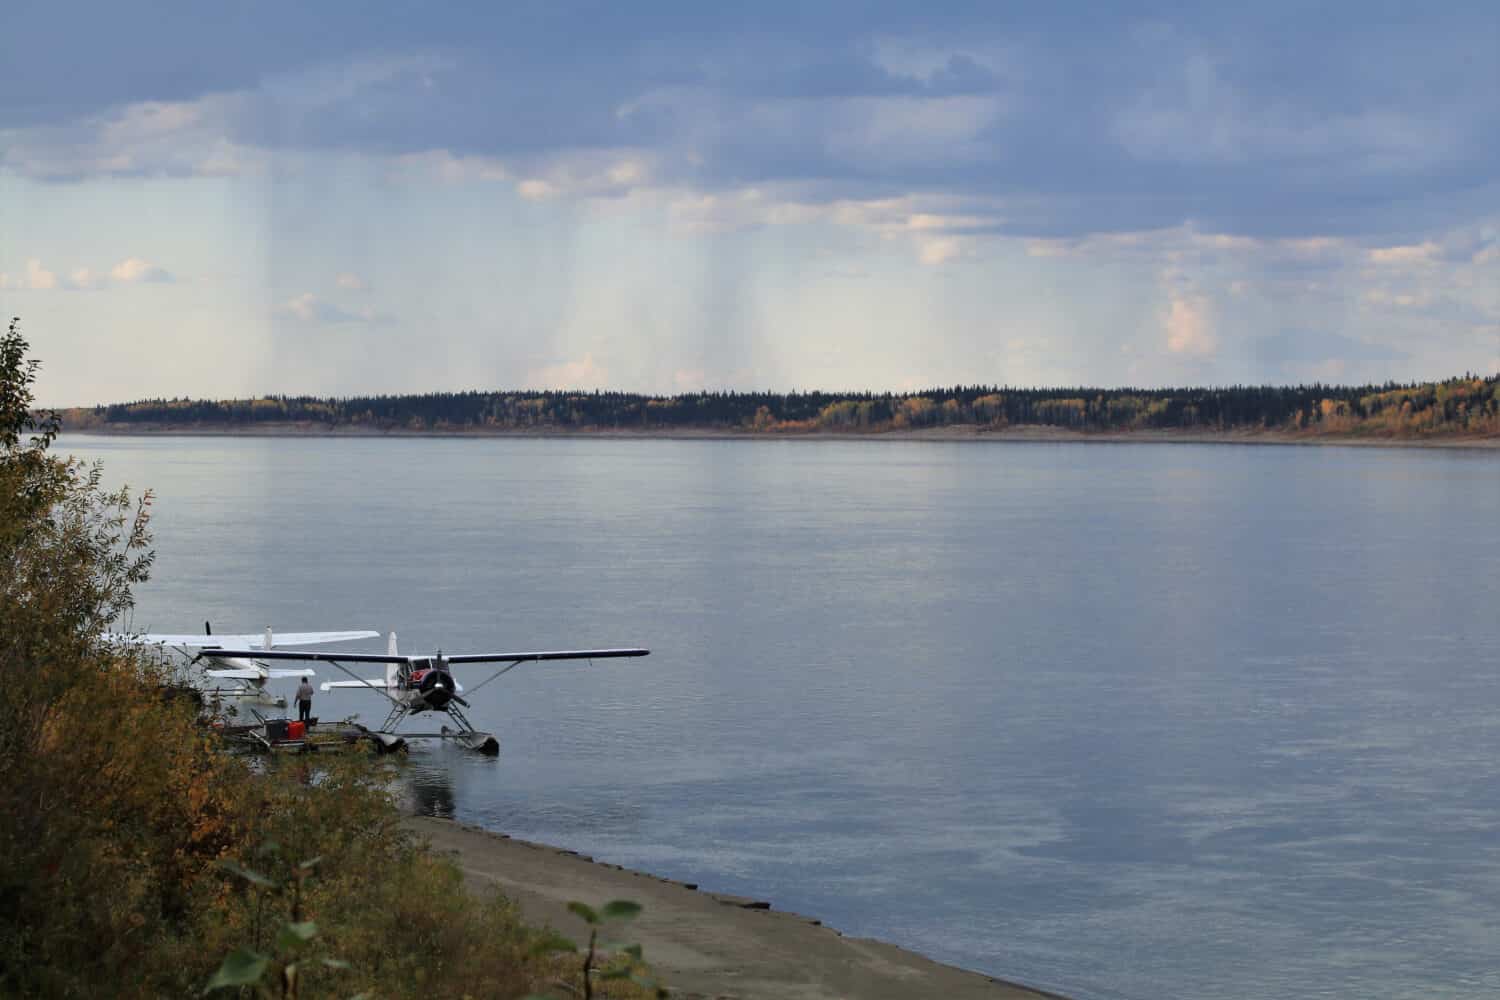 View over the Mackenzie River in Fort Simpson where the water plane piers of the local air companies are located.